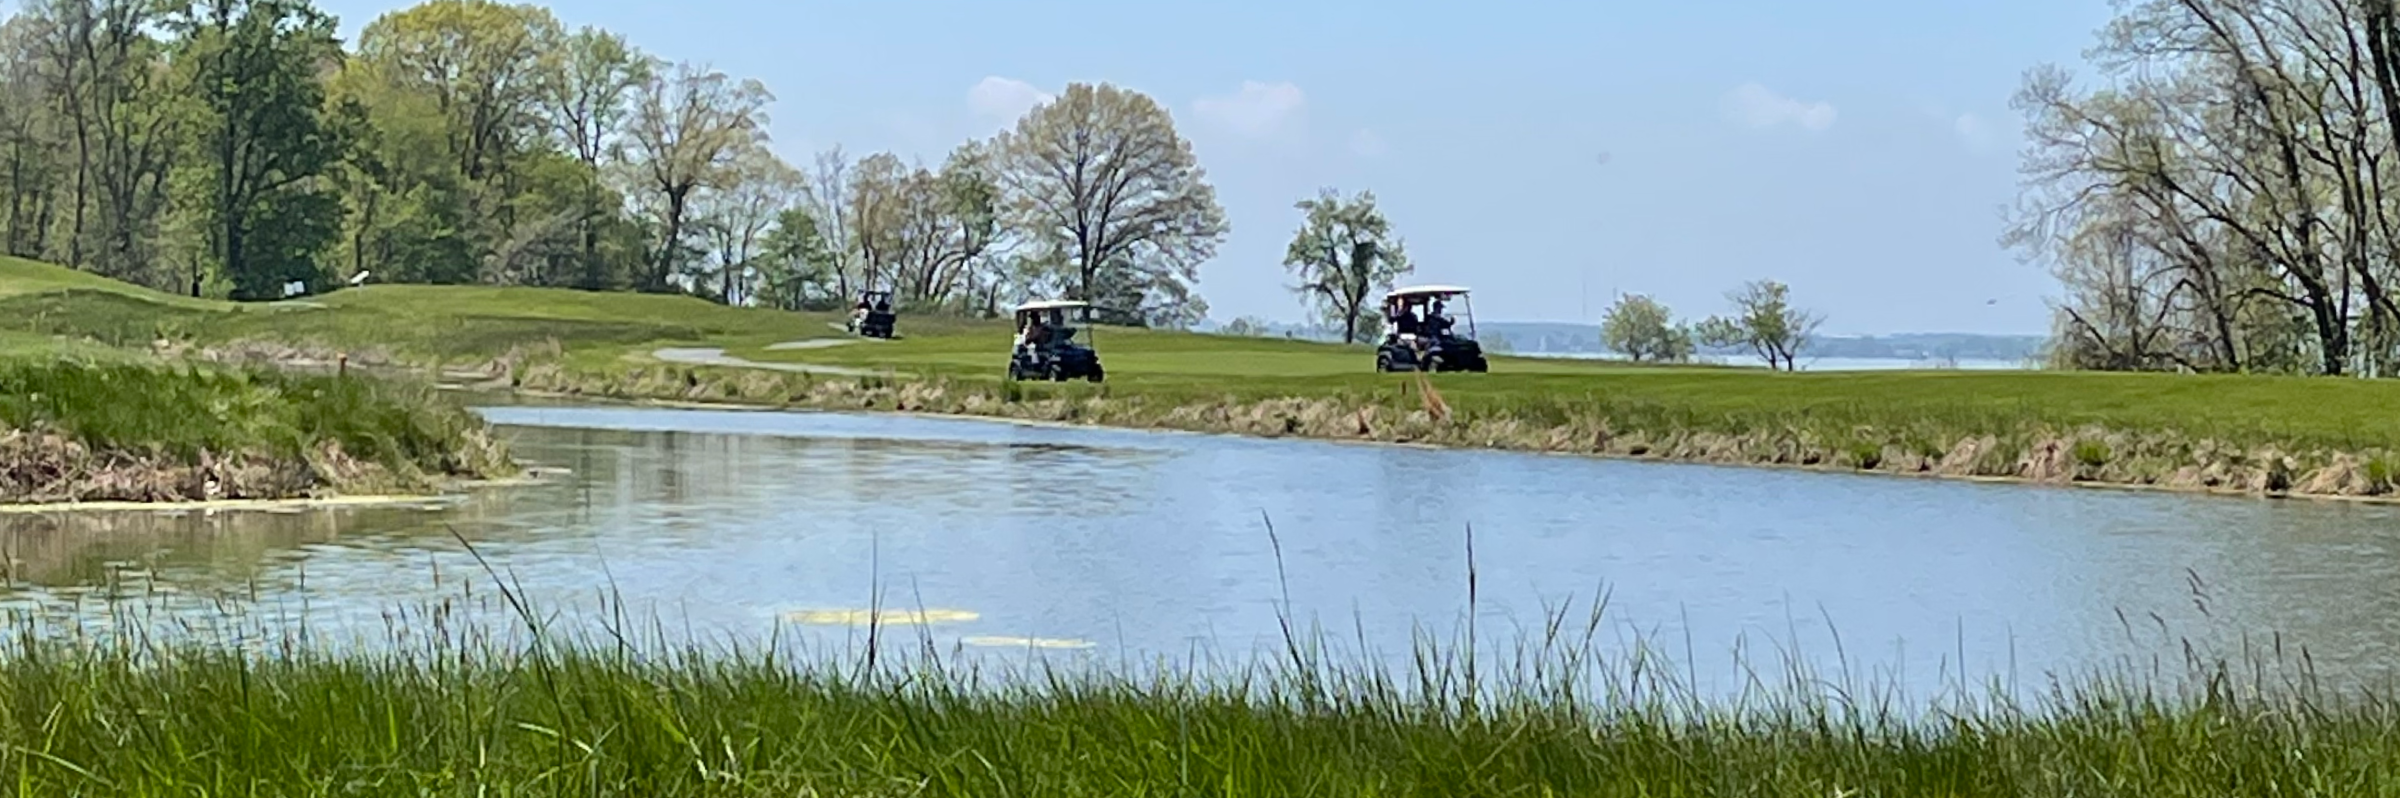 16th Annual Golf Tournament - Golf Carts on course